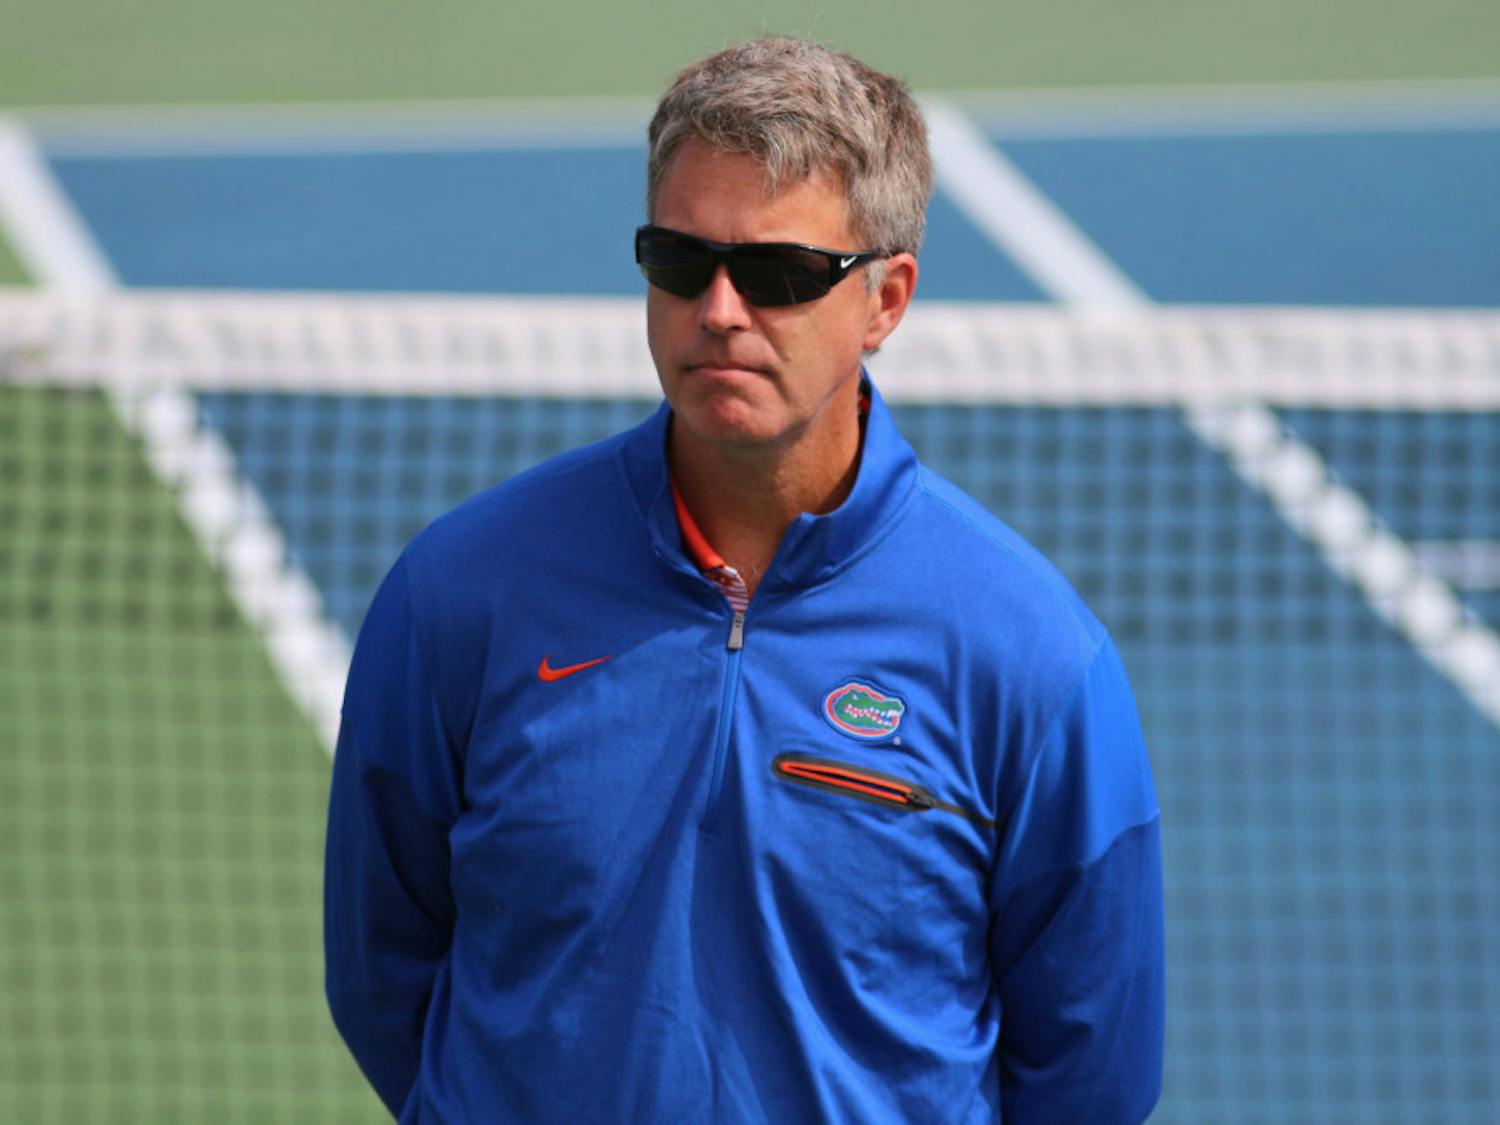 Coach Roland Thornqvist's women's tennis team&nbsp;SEC play on Friday at 5 p.m. when it hosts Ole Miss at the Ring Tennis Complex.